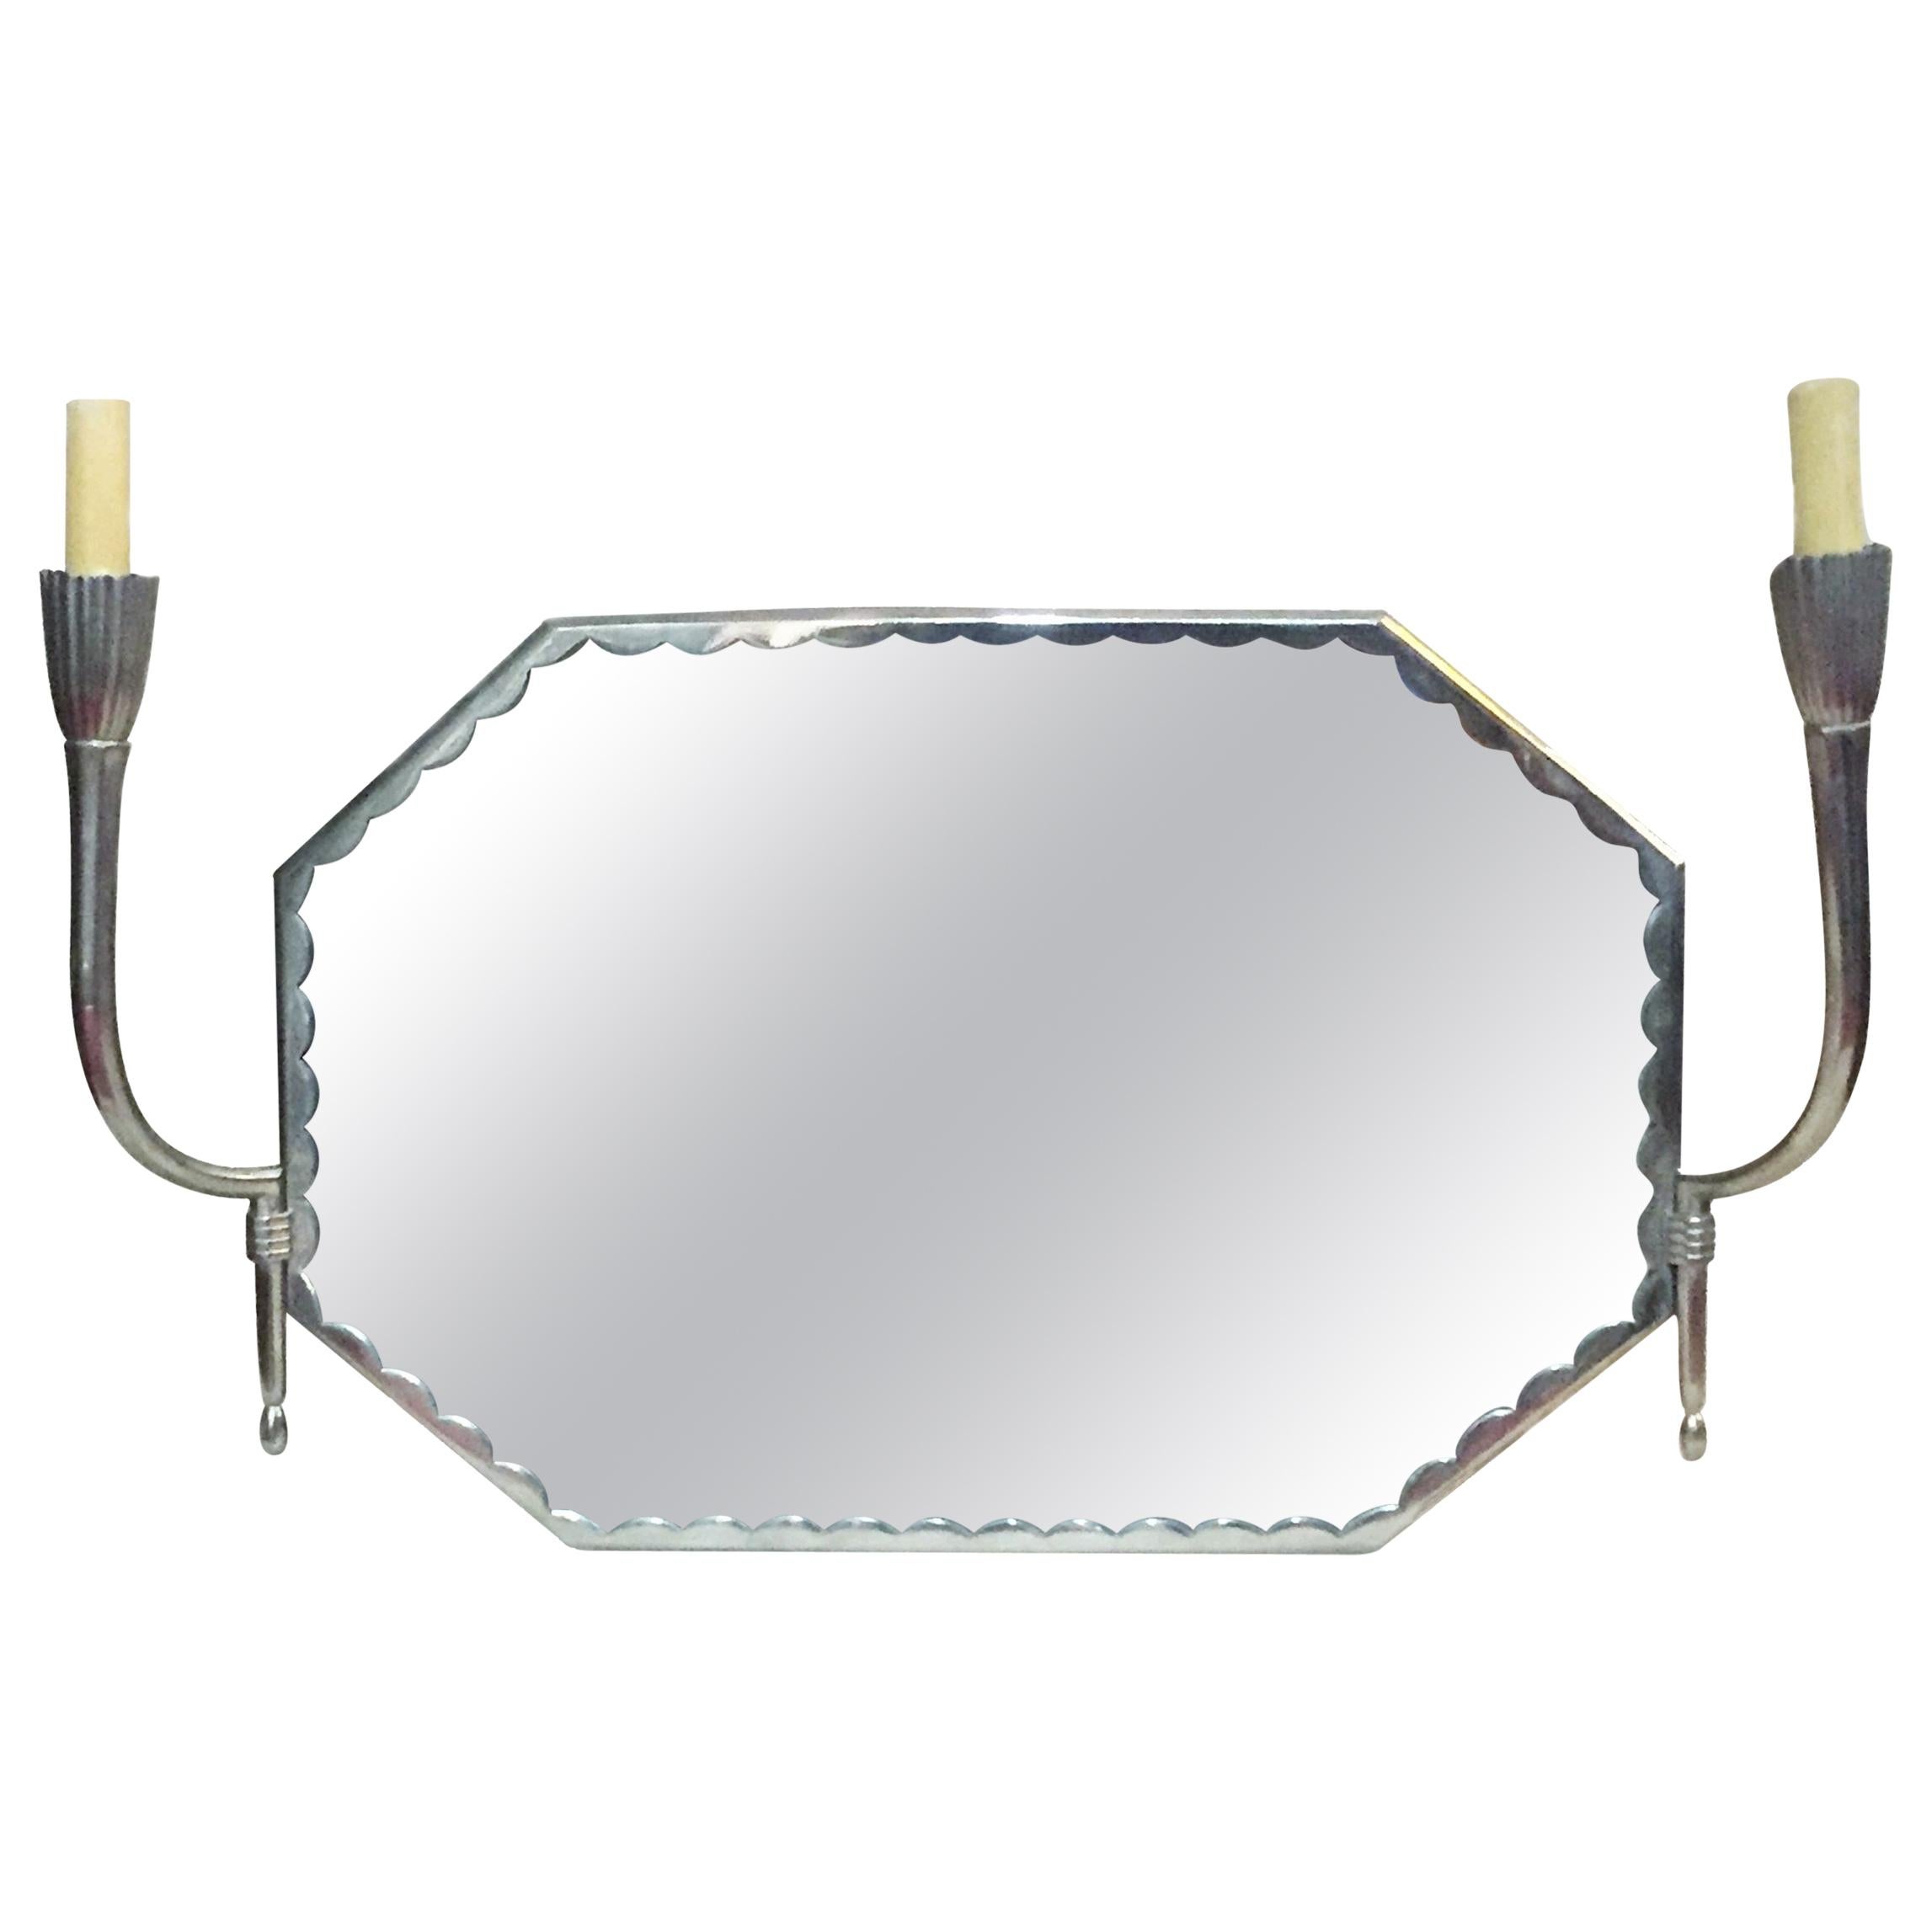 Maurice Dufrêne, French Art Deco Nickeled Bronze Wall Mirror, circa 1920s For Sale